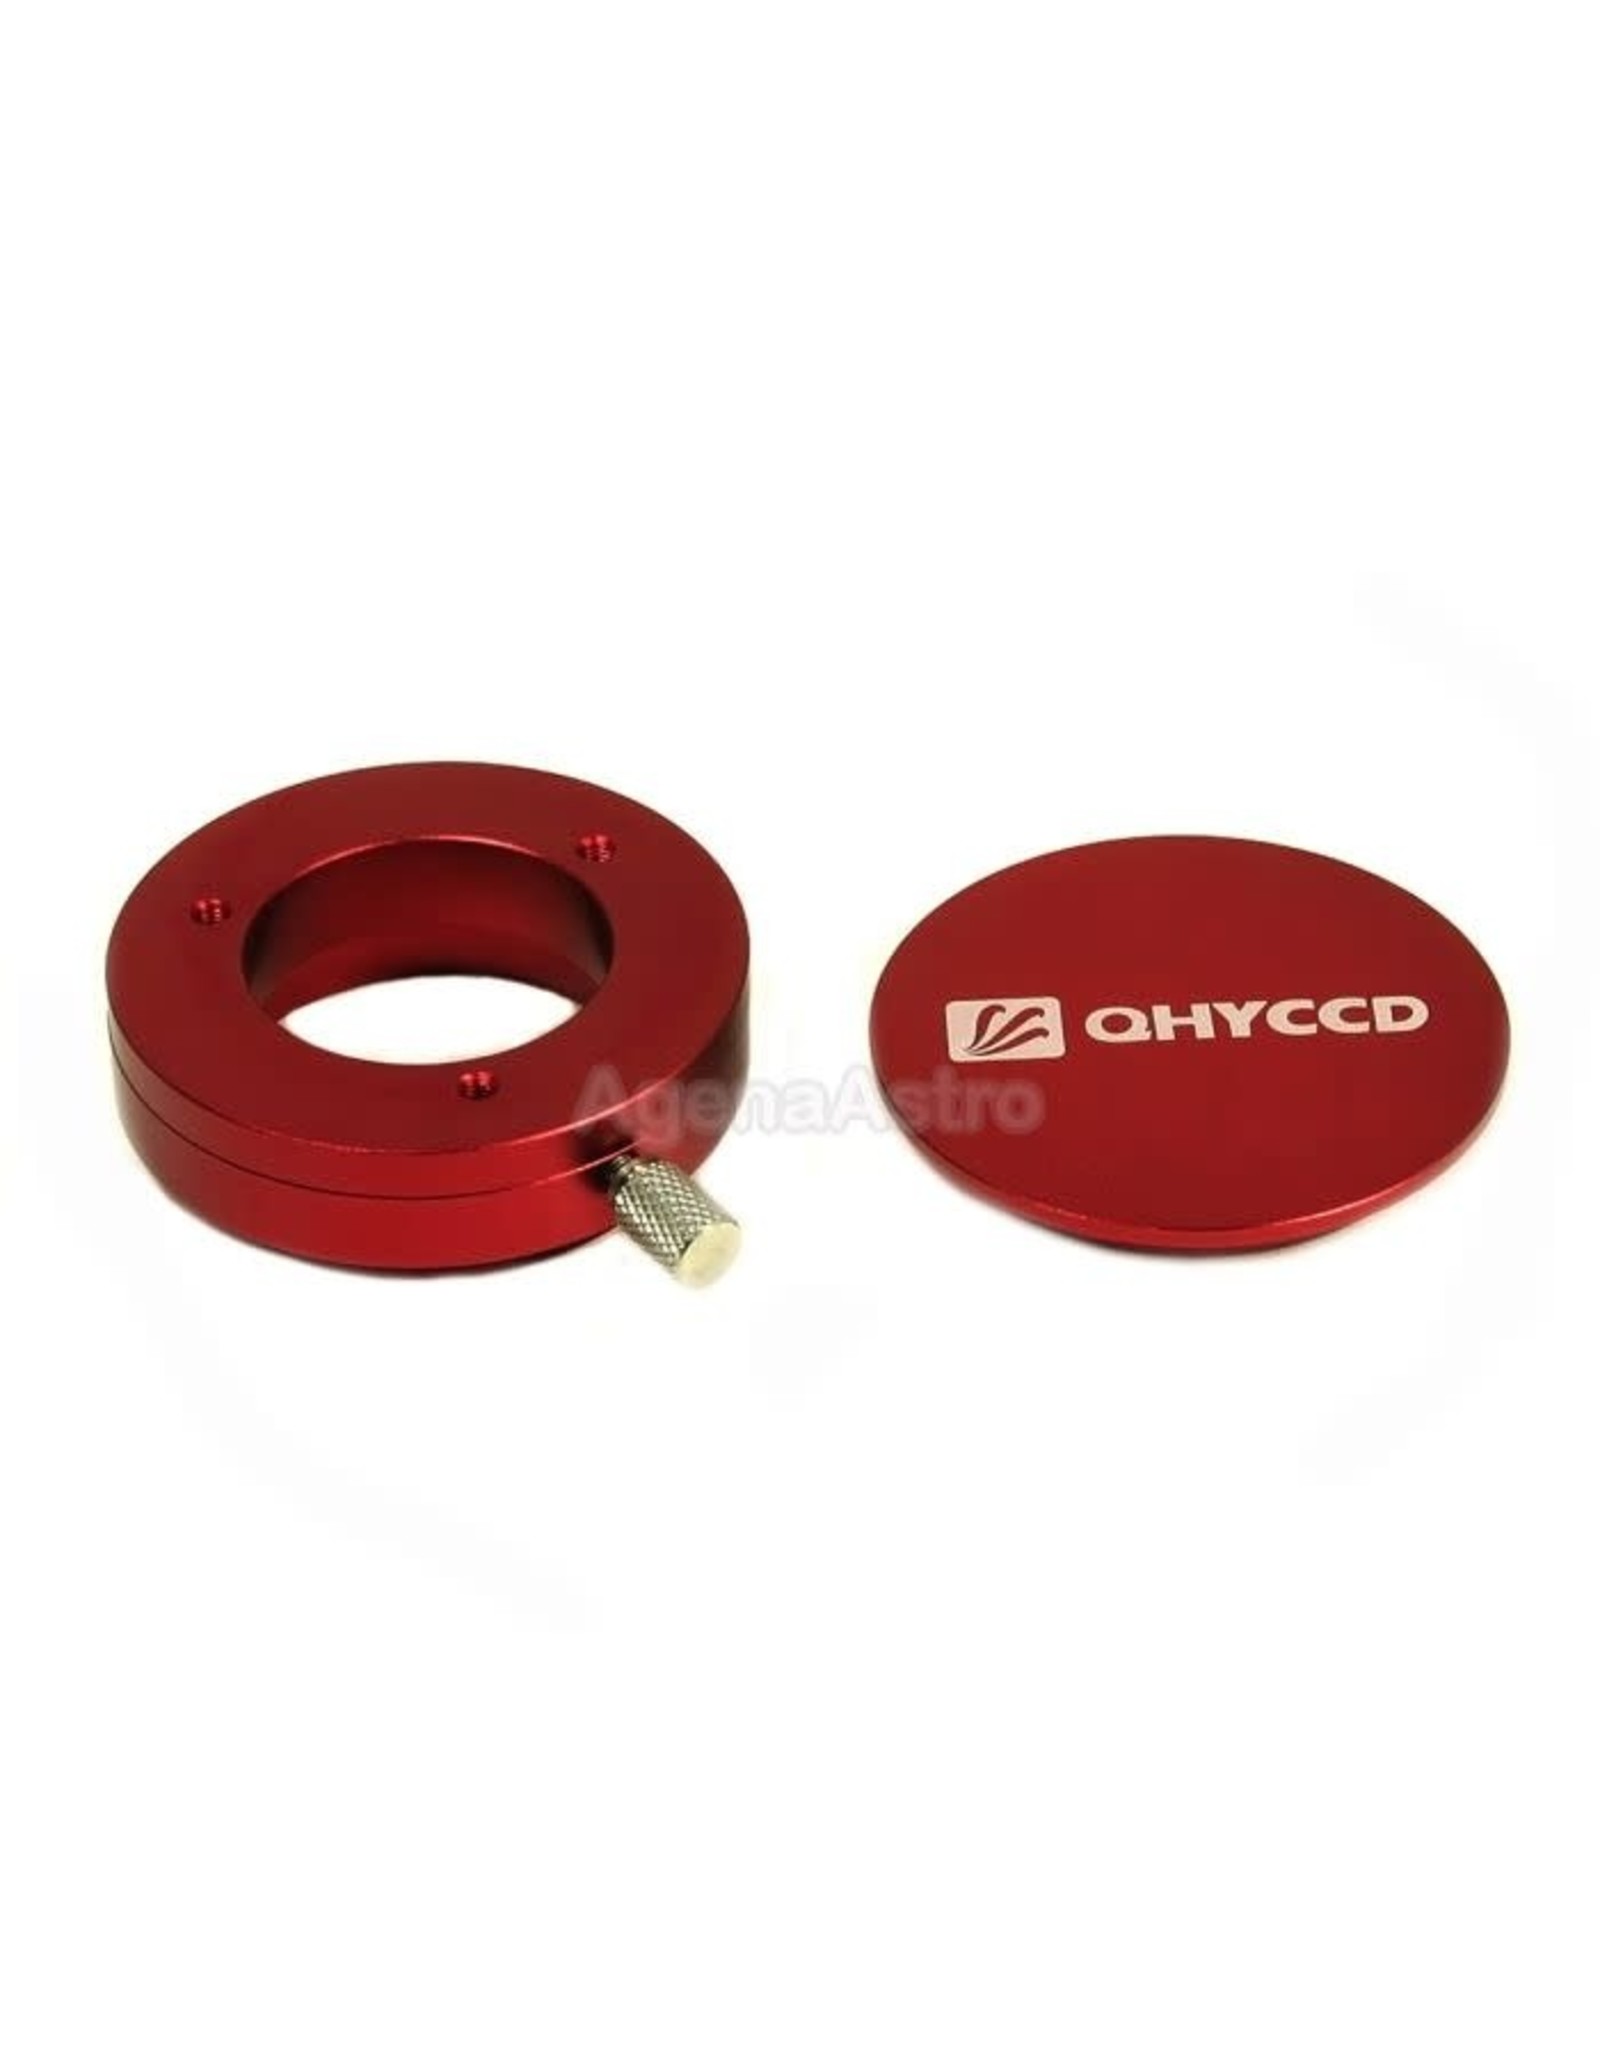 QHYCCD QHY Polemaster adapter for Takahashi NJP